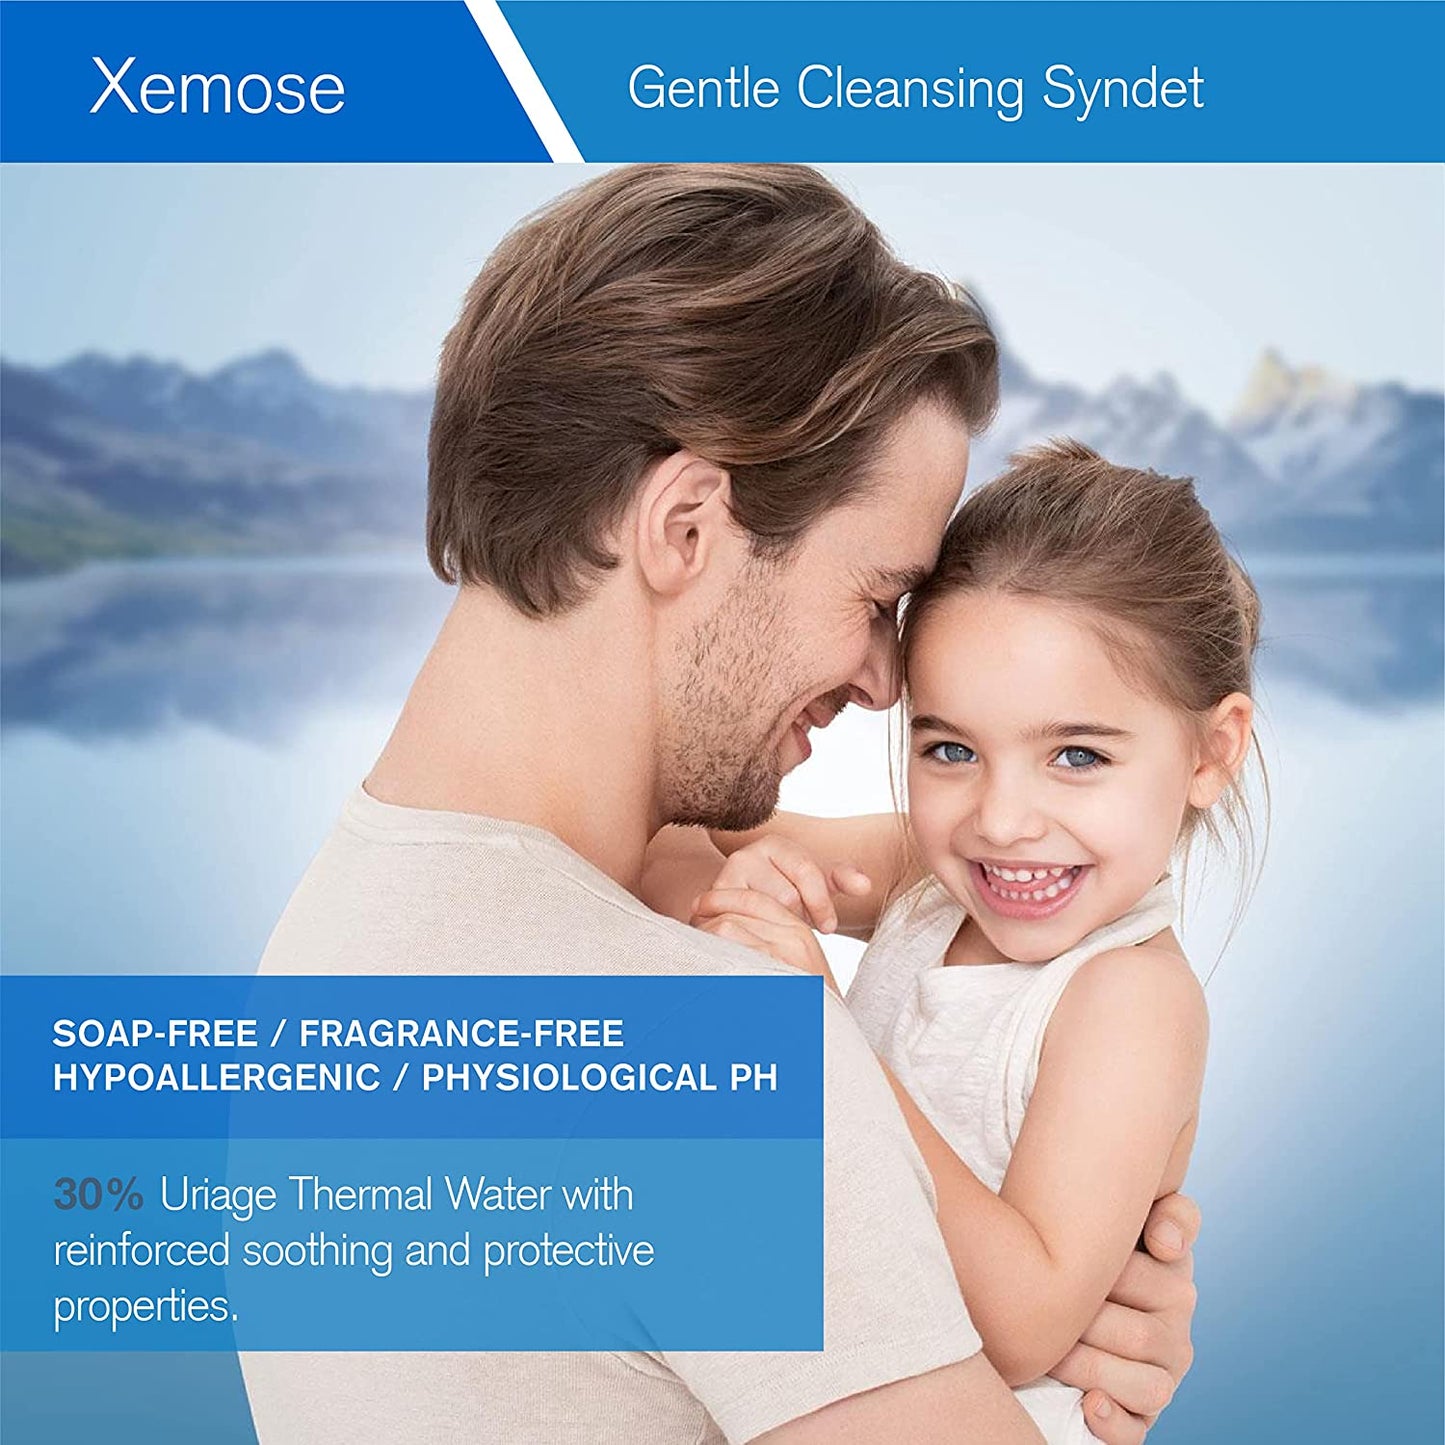 XEMOSE GENTLE CLEANSING SYNDET F 500 ML